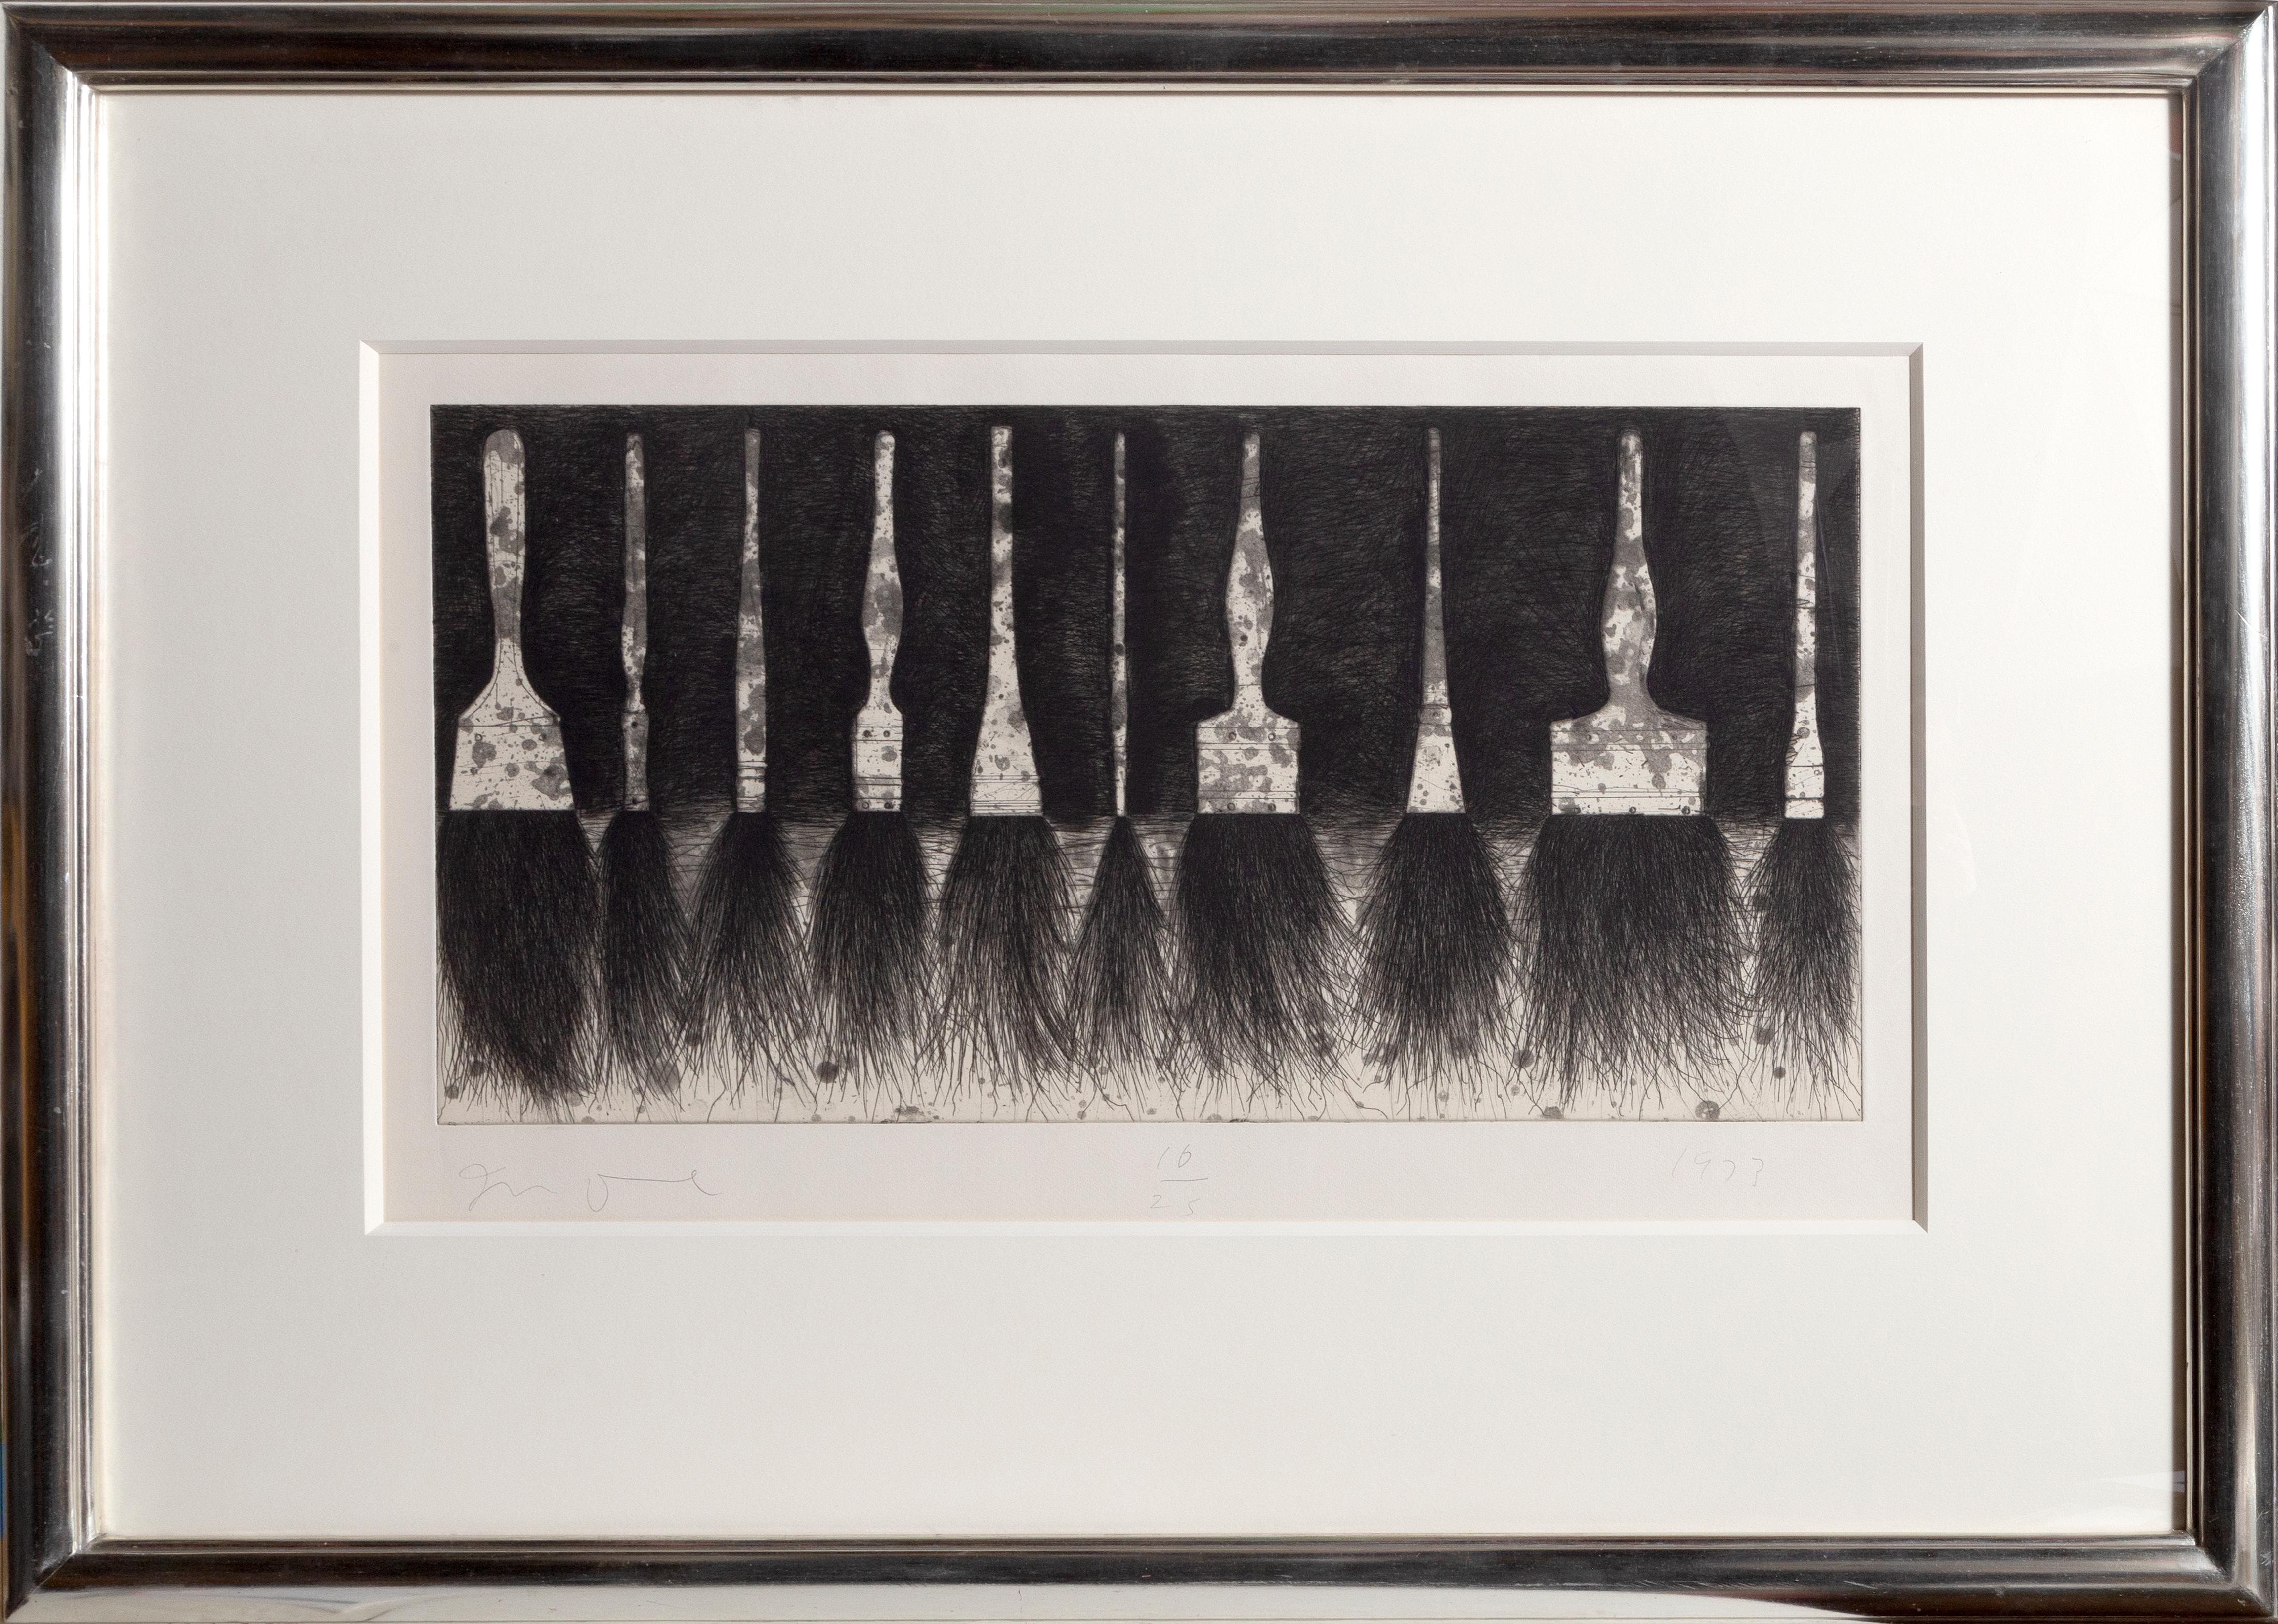 Artist: Jim Dine, American (1935 -  )
Title: Five Paintbrushes
Date: 1973
Medium: Etching, drypoint, and aquatint 
Edition: 16/25
Signature: Signed, numbered, and dated in pencil 
Plate Size: 13.5 x 27 inches
Frame Size: 32 x 44 inches

Sixth state